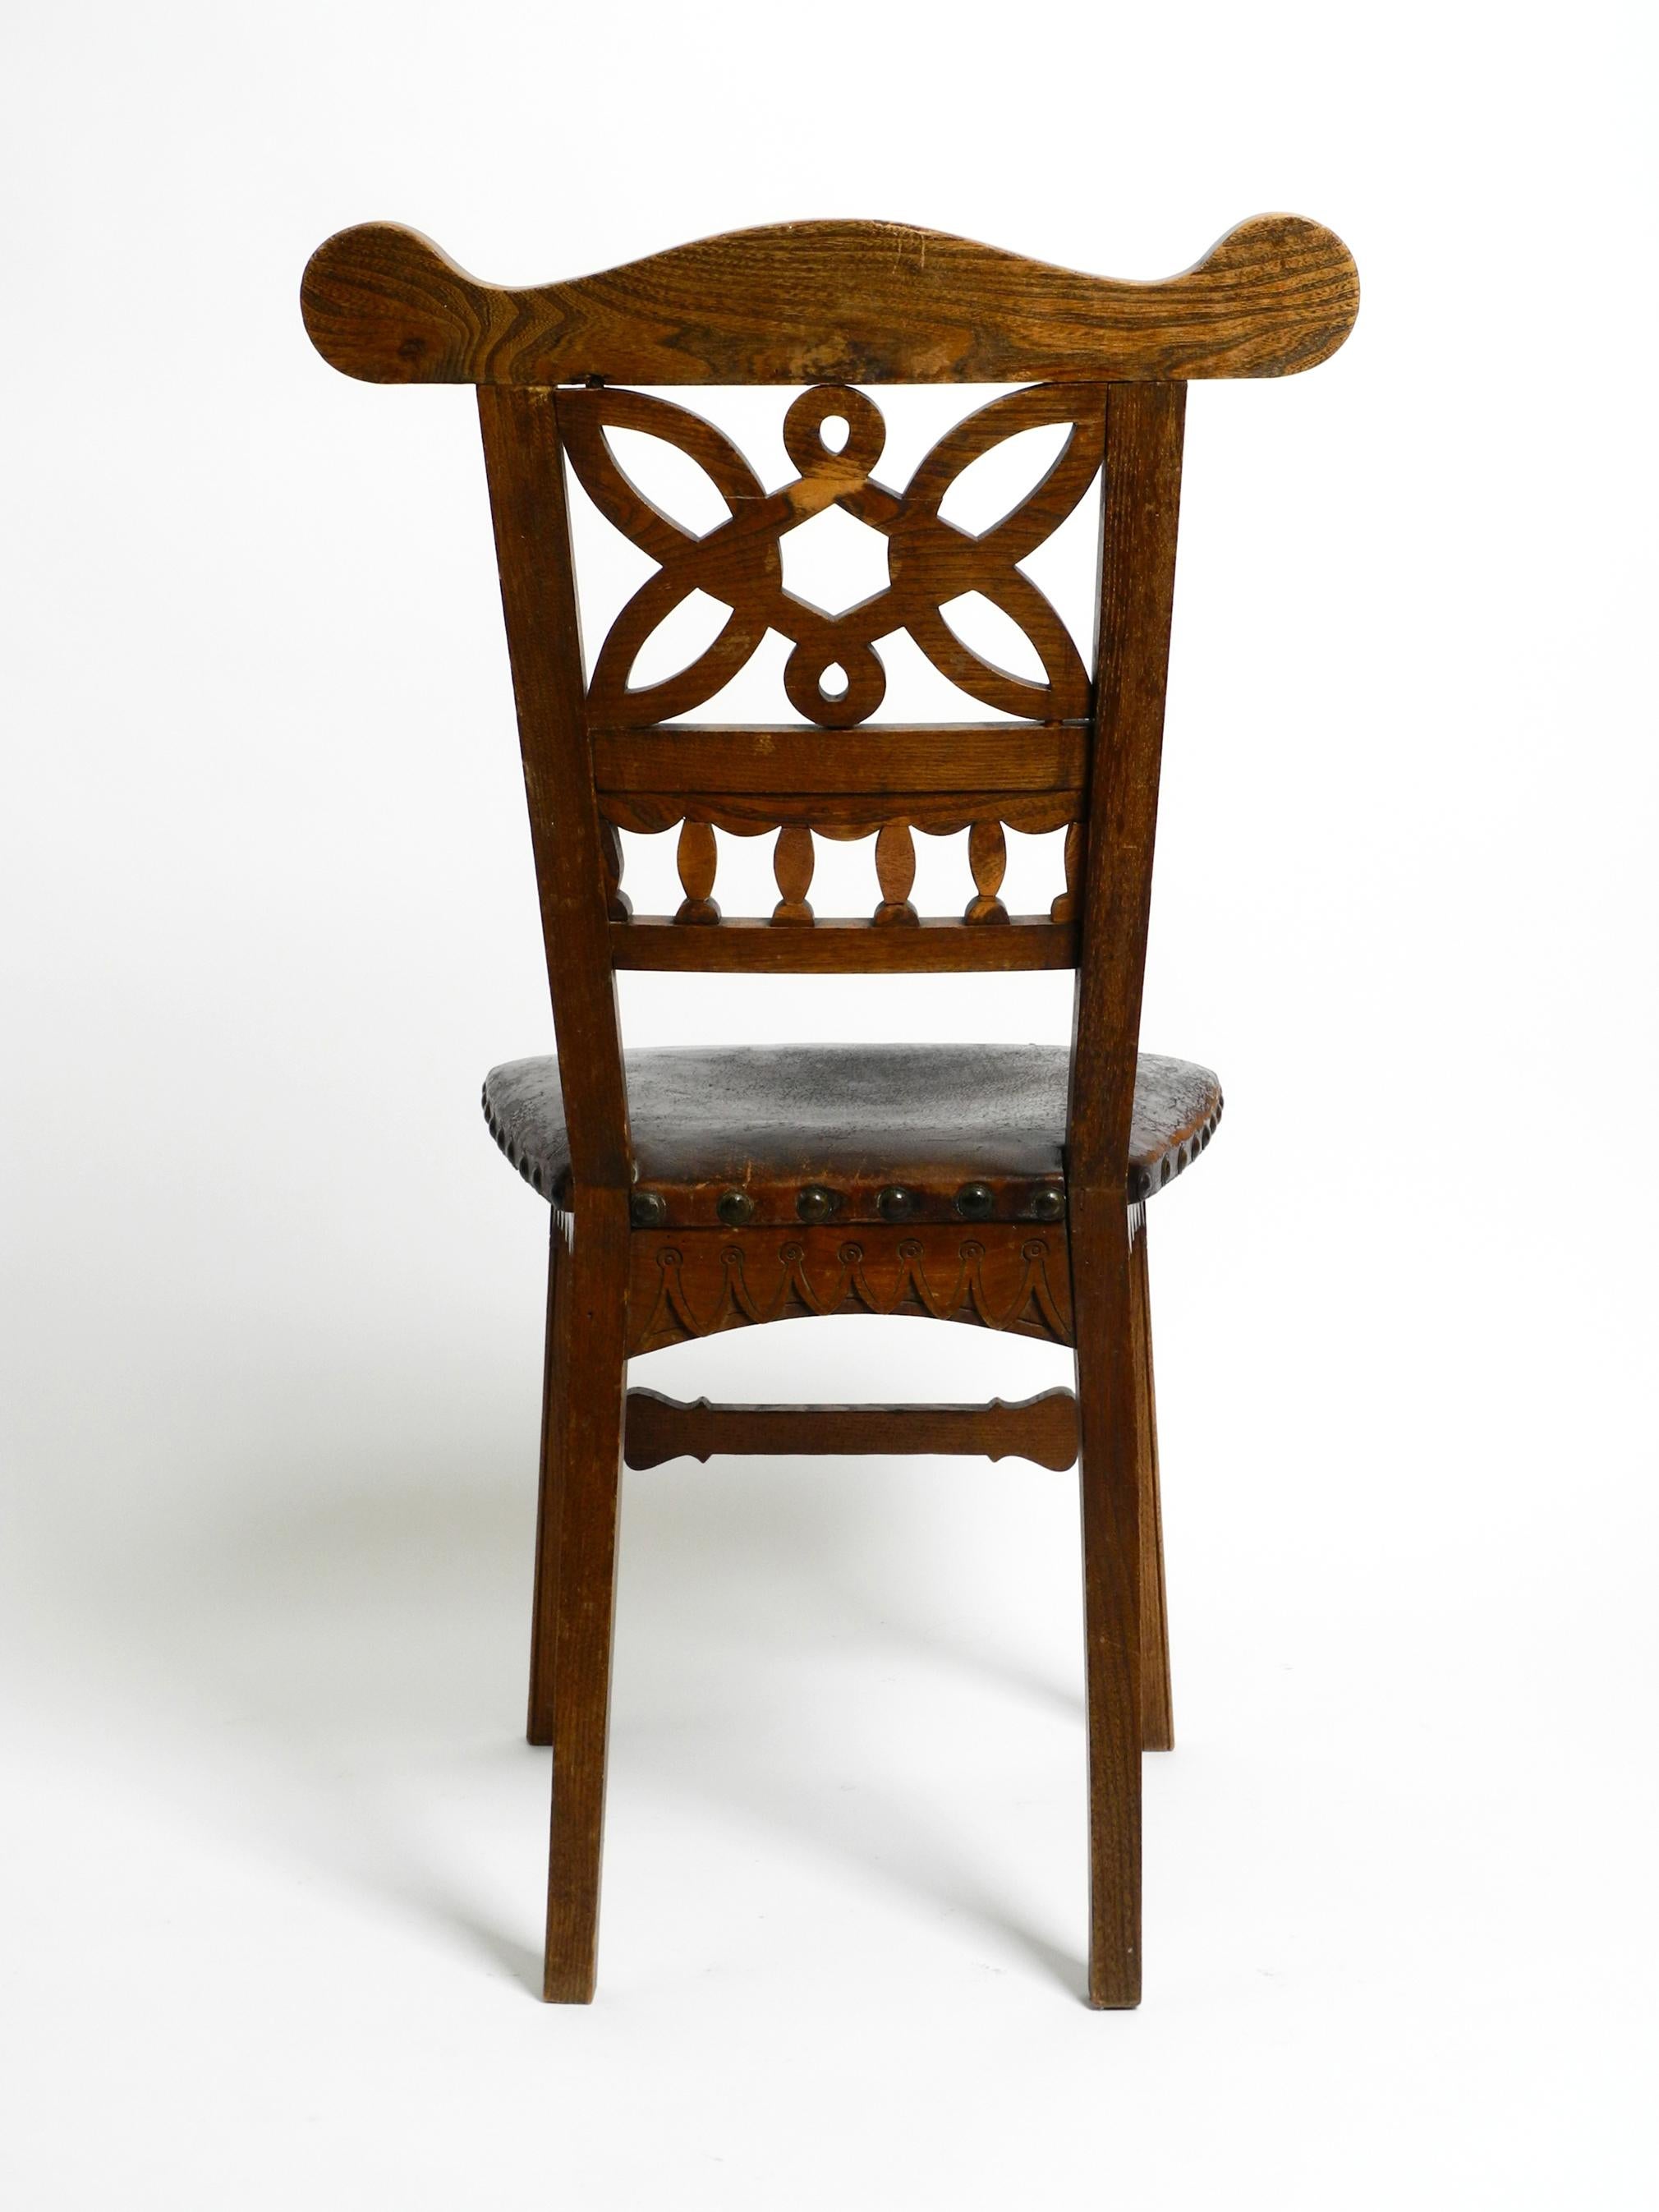 2 Art Nouveau Oak Chairs Still with the Original Leather Seats from Around 1900 For Sale 13